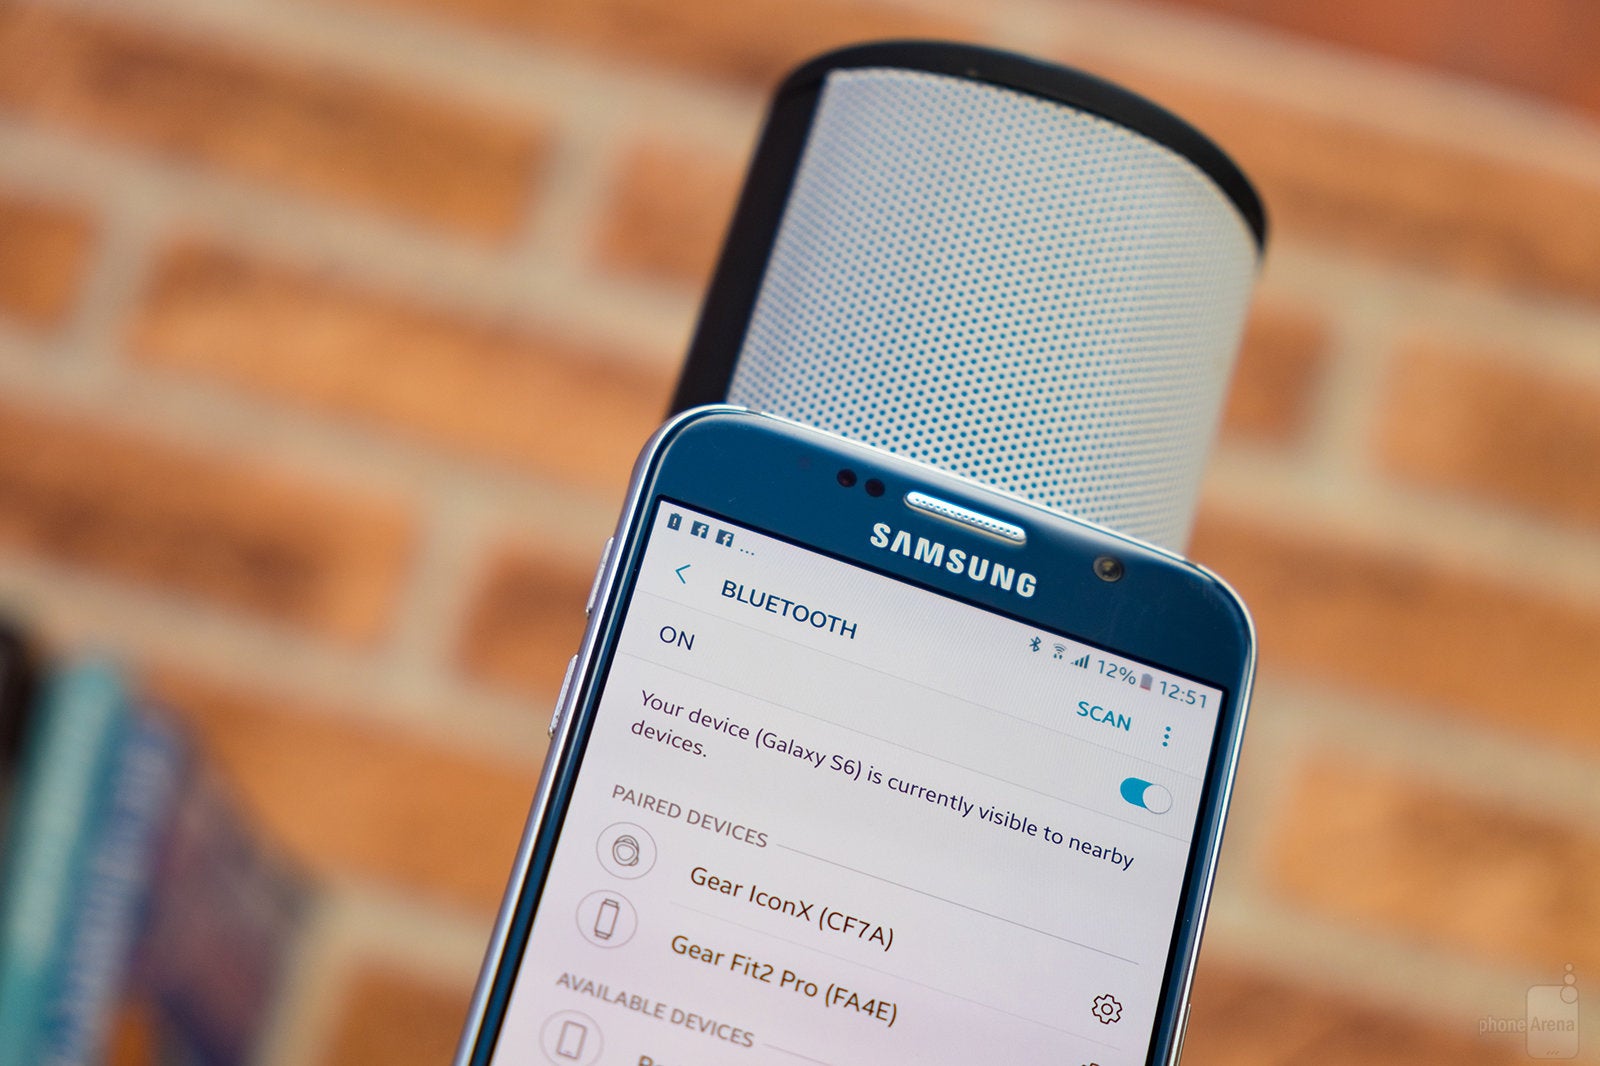 How to turn your old Android phone into a Google Assistant-powered smart speaker